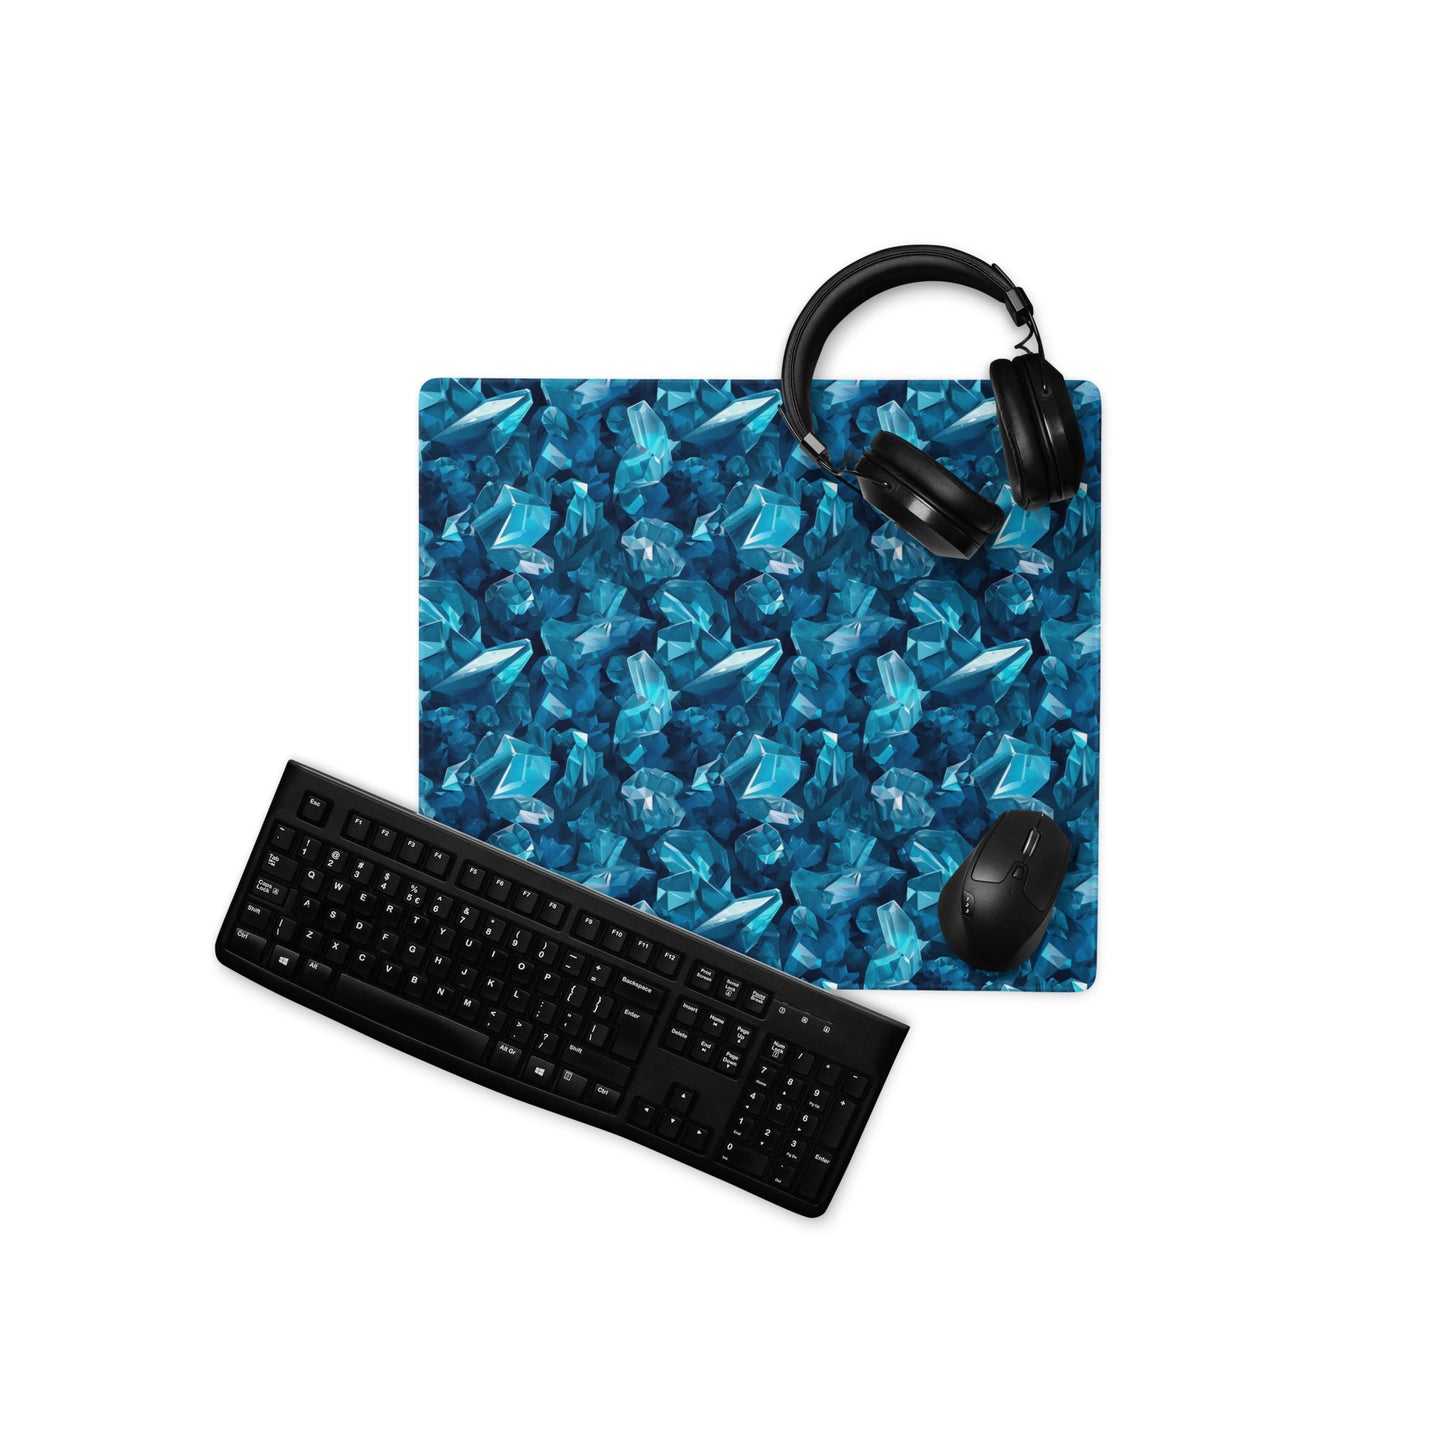 An 18" x 16" gaming desk pad with blue crystals. A keyboard, mouse, and headphones sit on it.